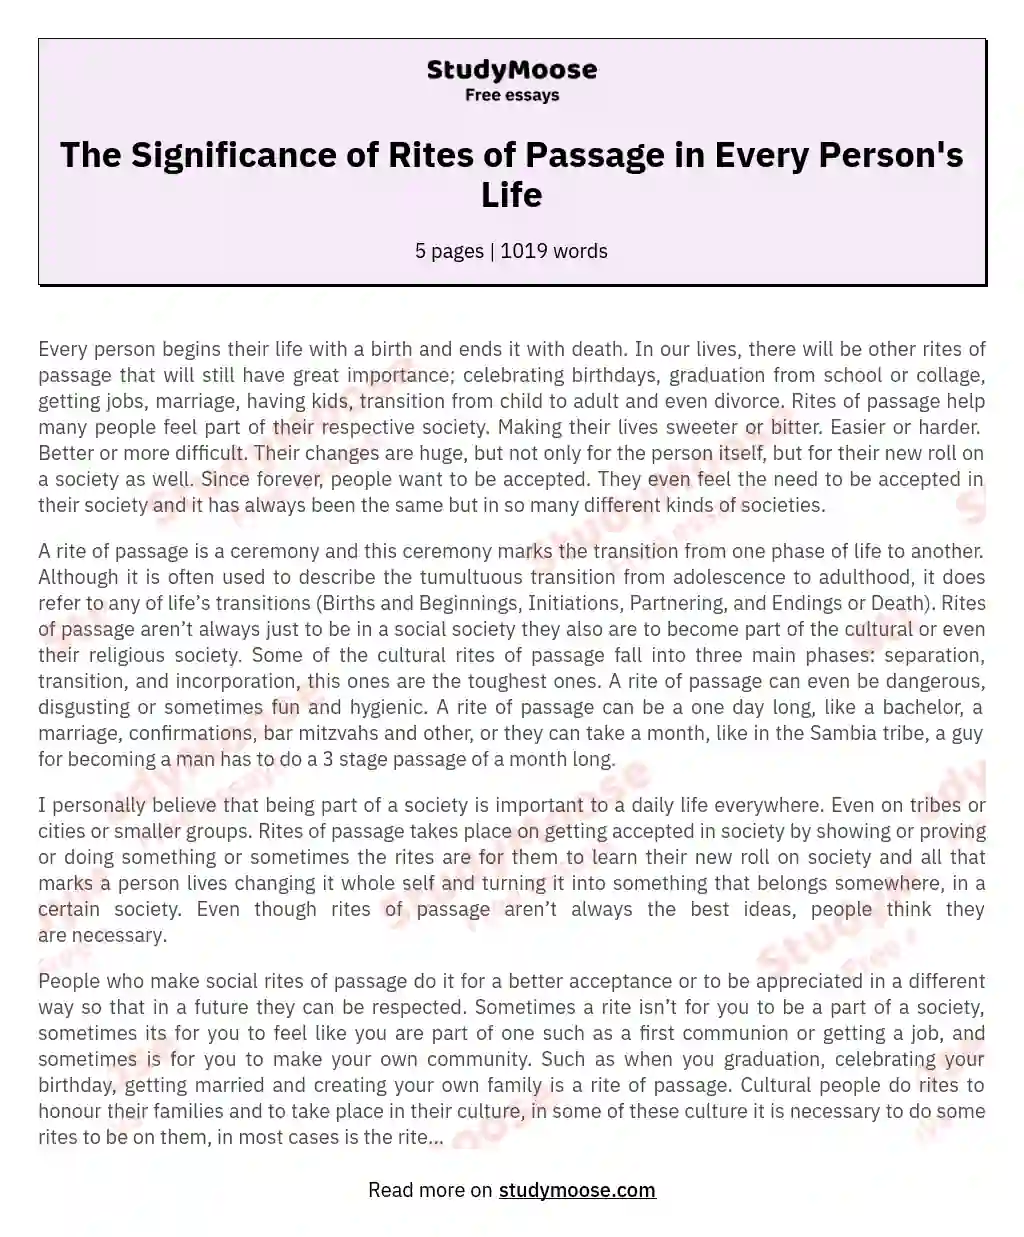 The Significance of Rites of Passage in Every Person's Life essay